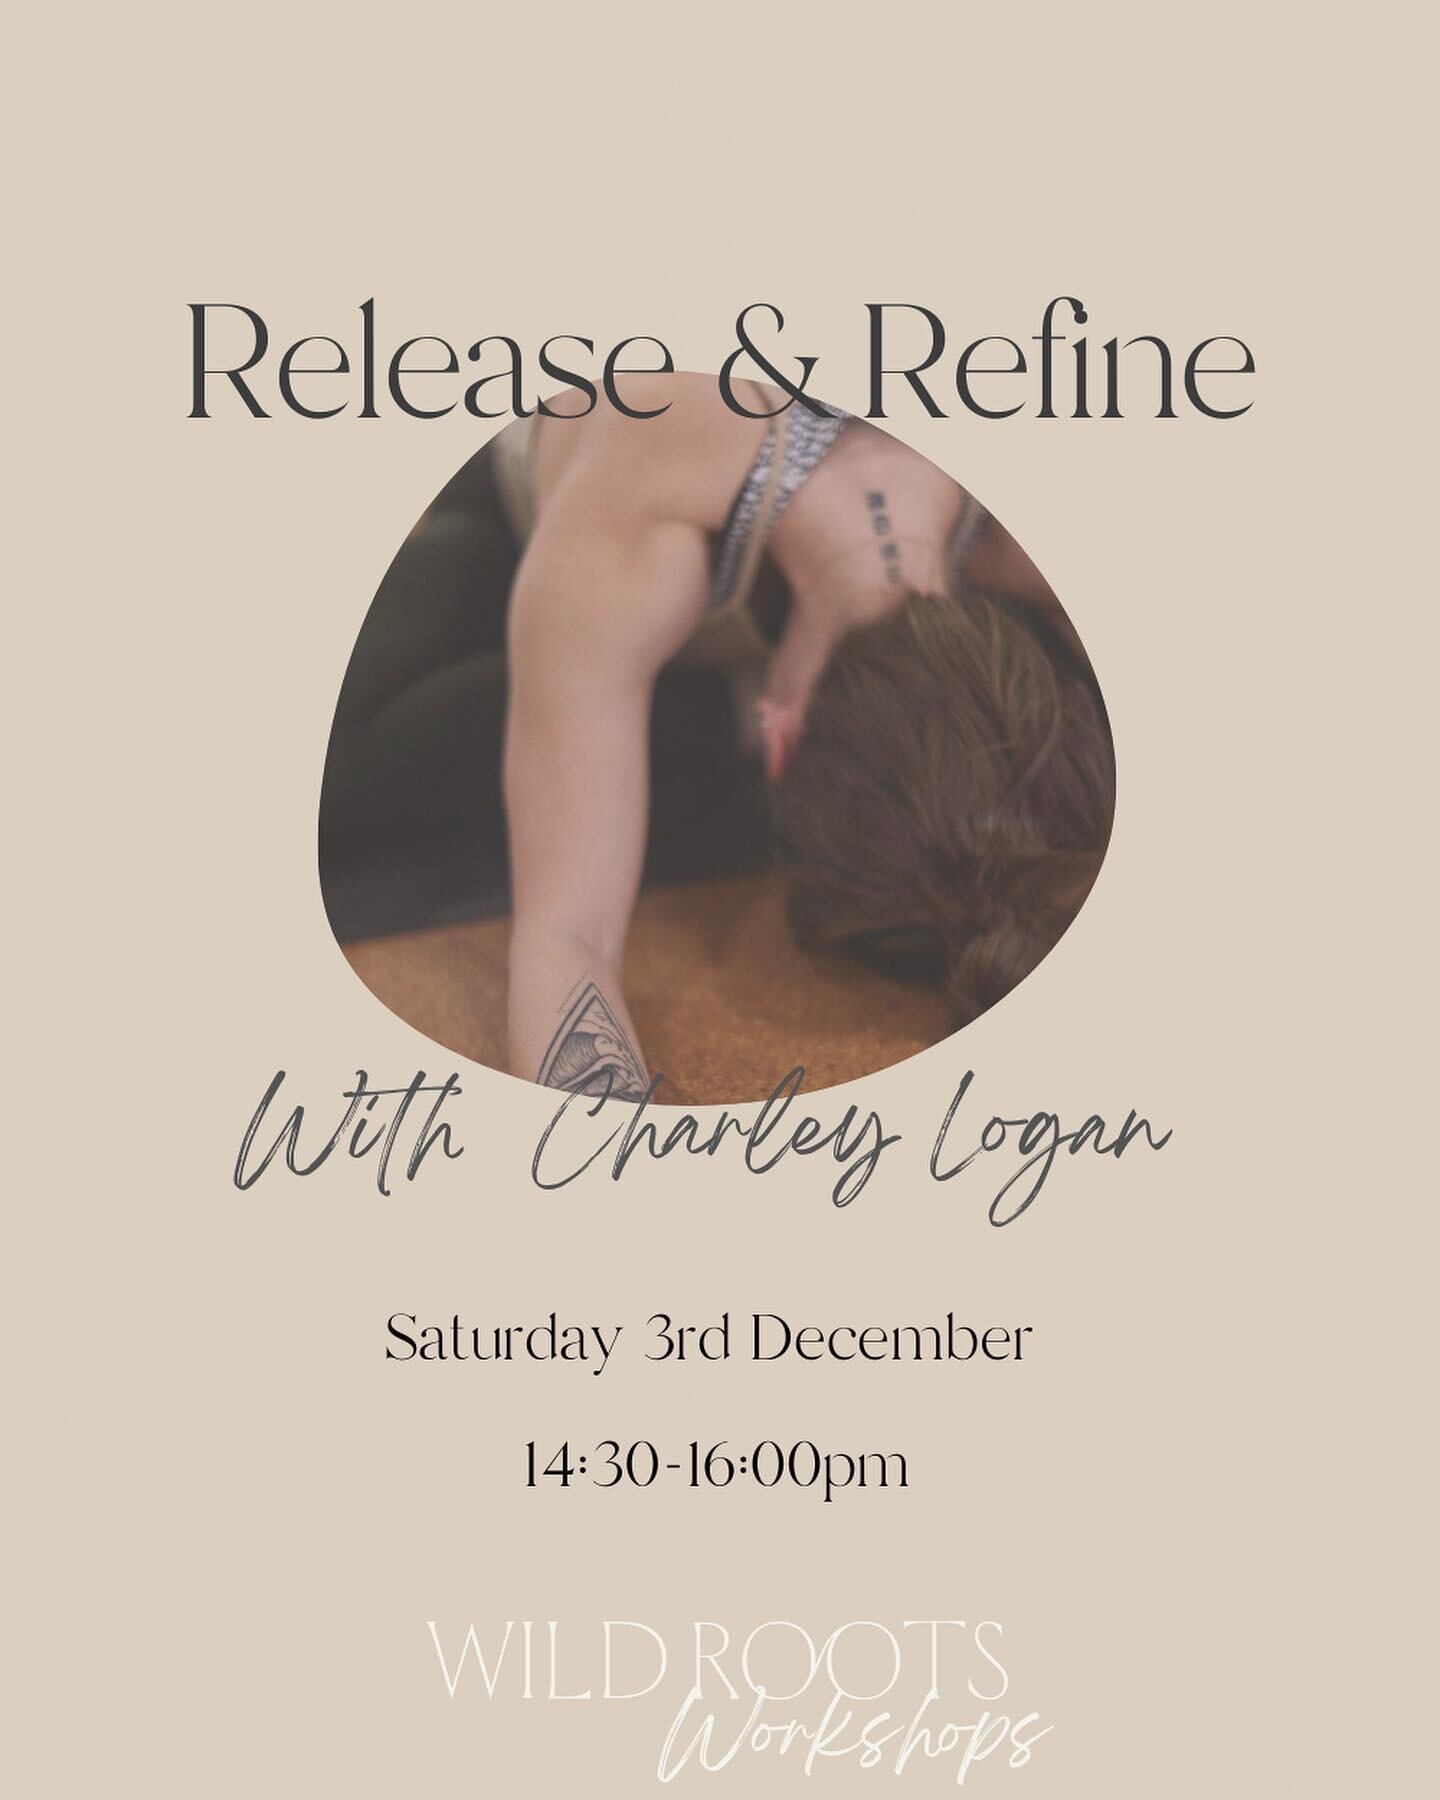 Release &amp; Refine with @char___logan 
Saturday 3rd December
2:30-4pm 

🤎An afternoon workshop of movement, journaling and yin, designed for you to process, let go and get clear.

We will open with 30 minutes of flow yoga, allowing you the space t